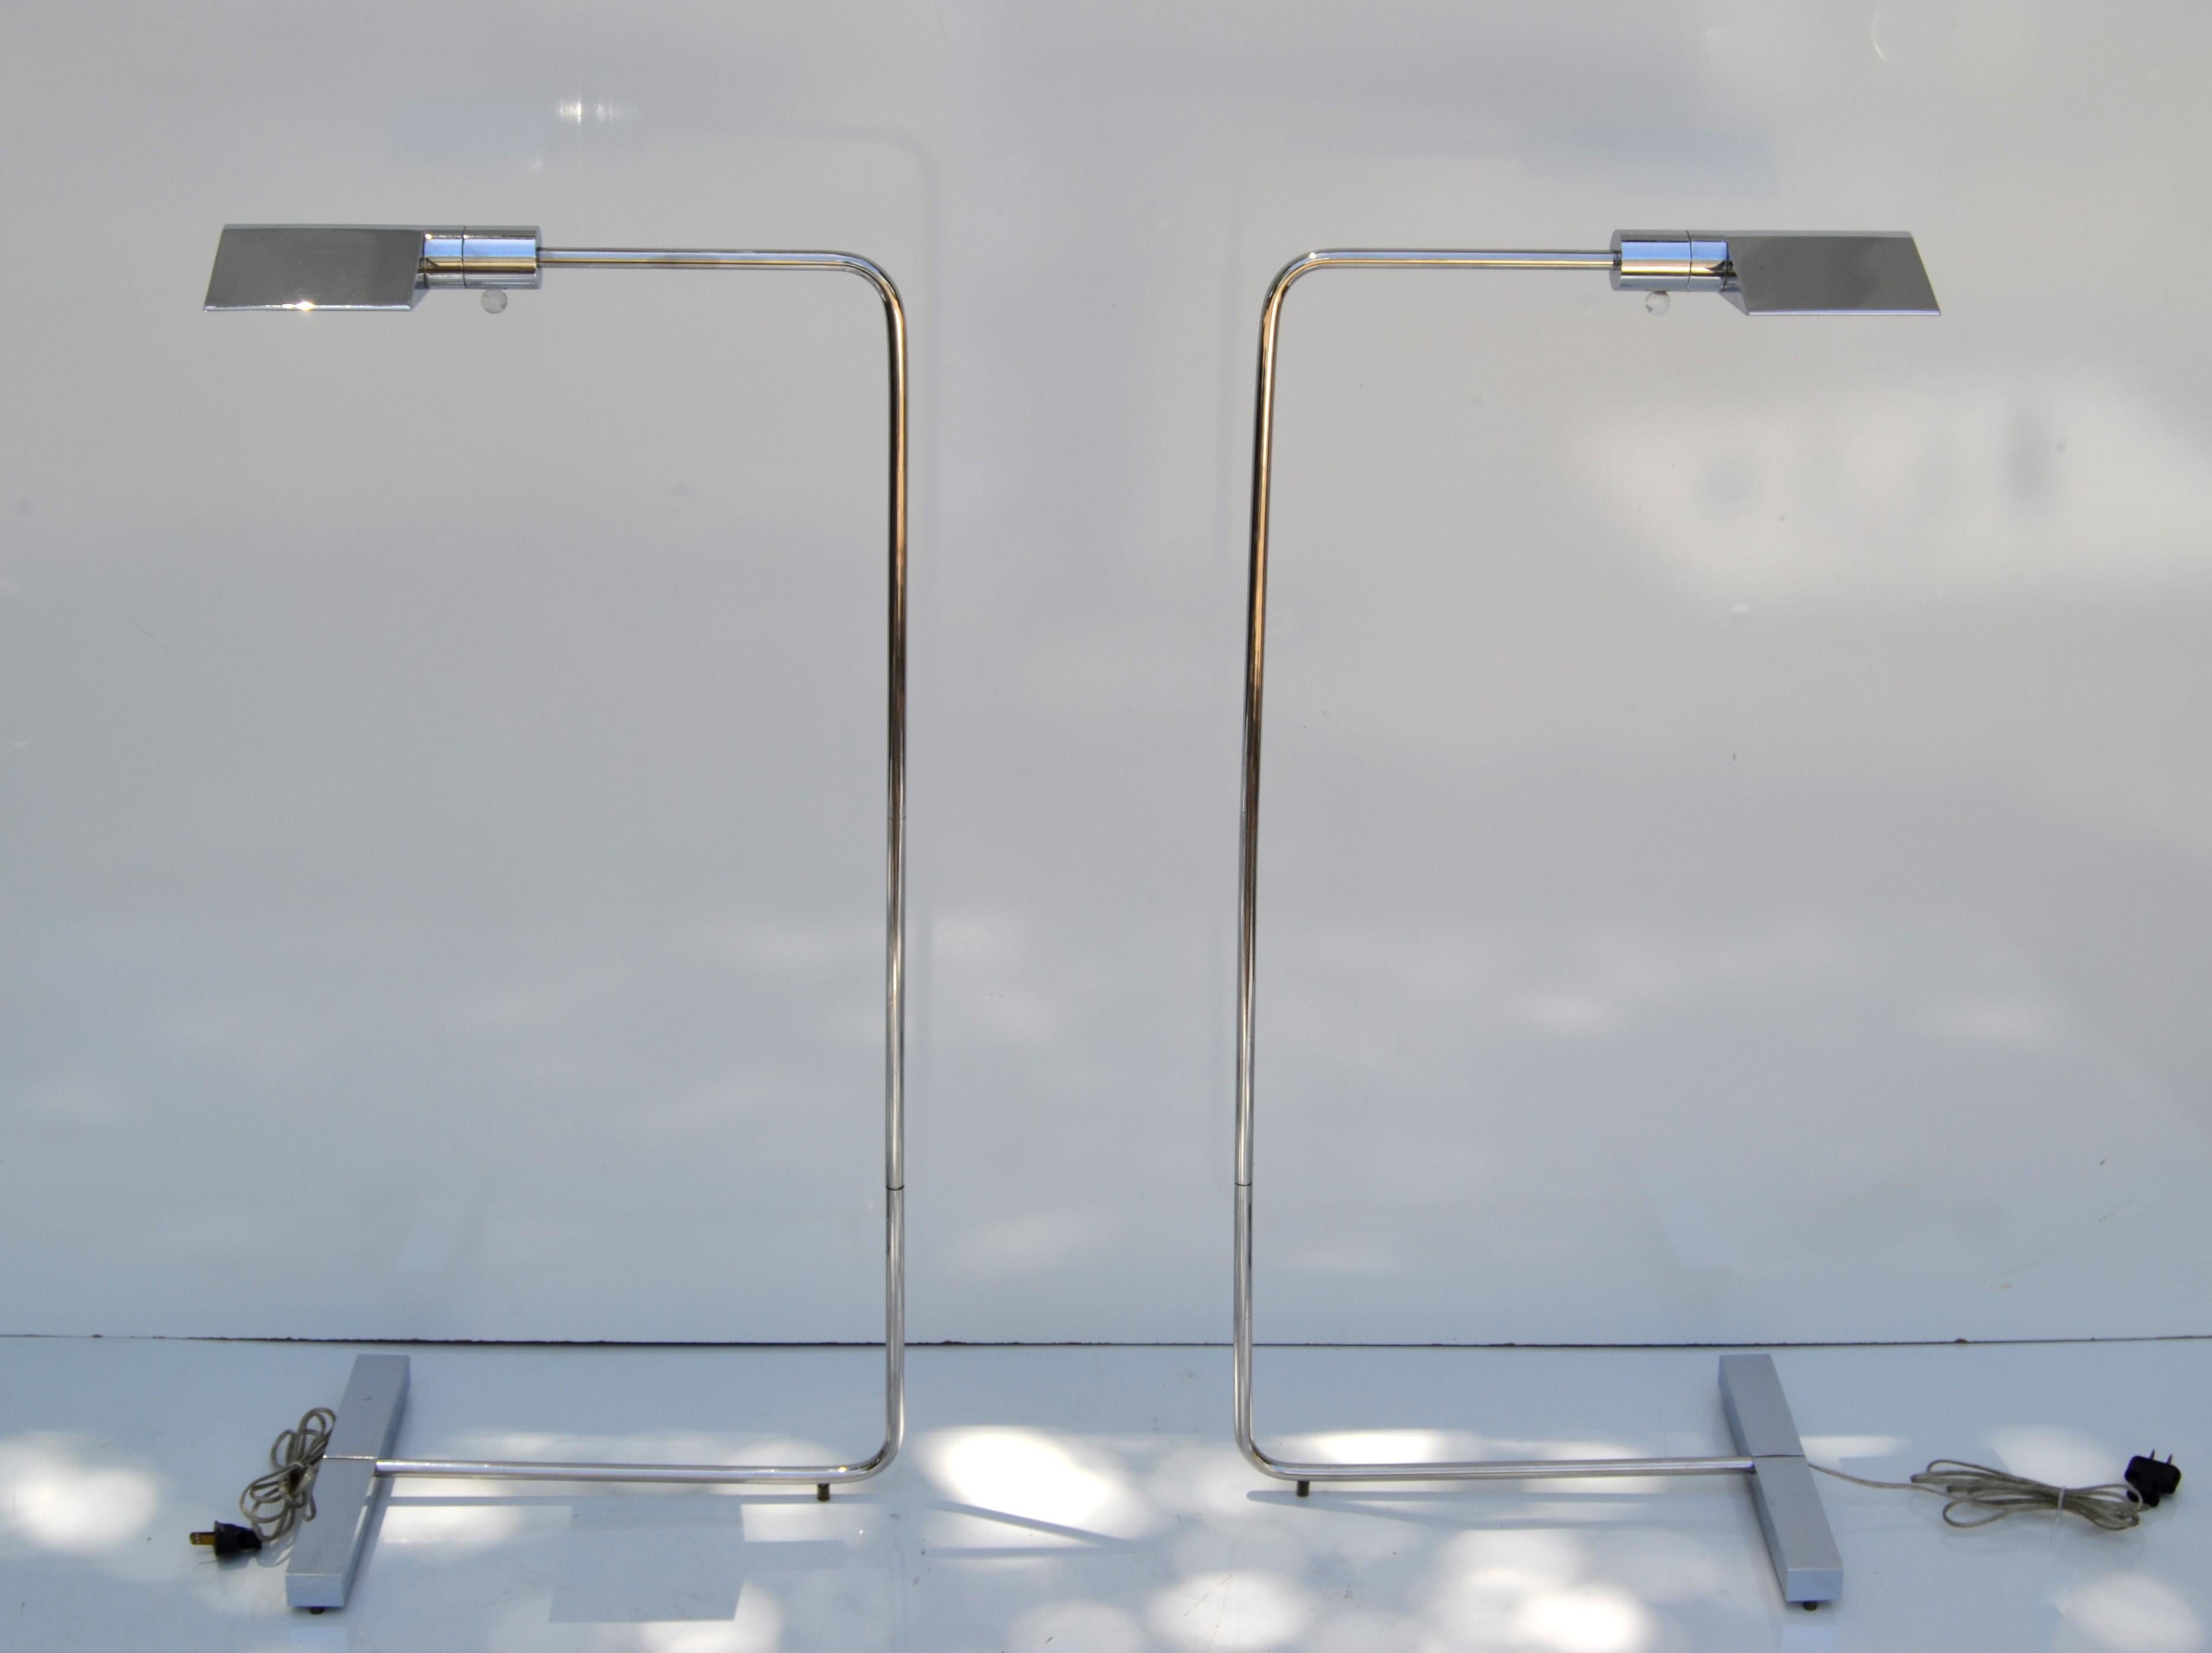 Exceptional Pair of 1UWV Floor Lamps in Chrome, Steel and Lucite by Cedric Hartman, Mid-Century America made in the 1970.
Classic Design with telescopic and height adjustable function & Lucite knob to turn it on / off.
Newly US wiring and in working